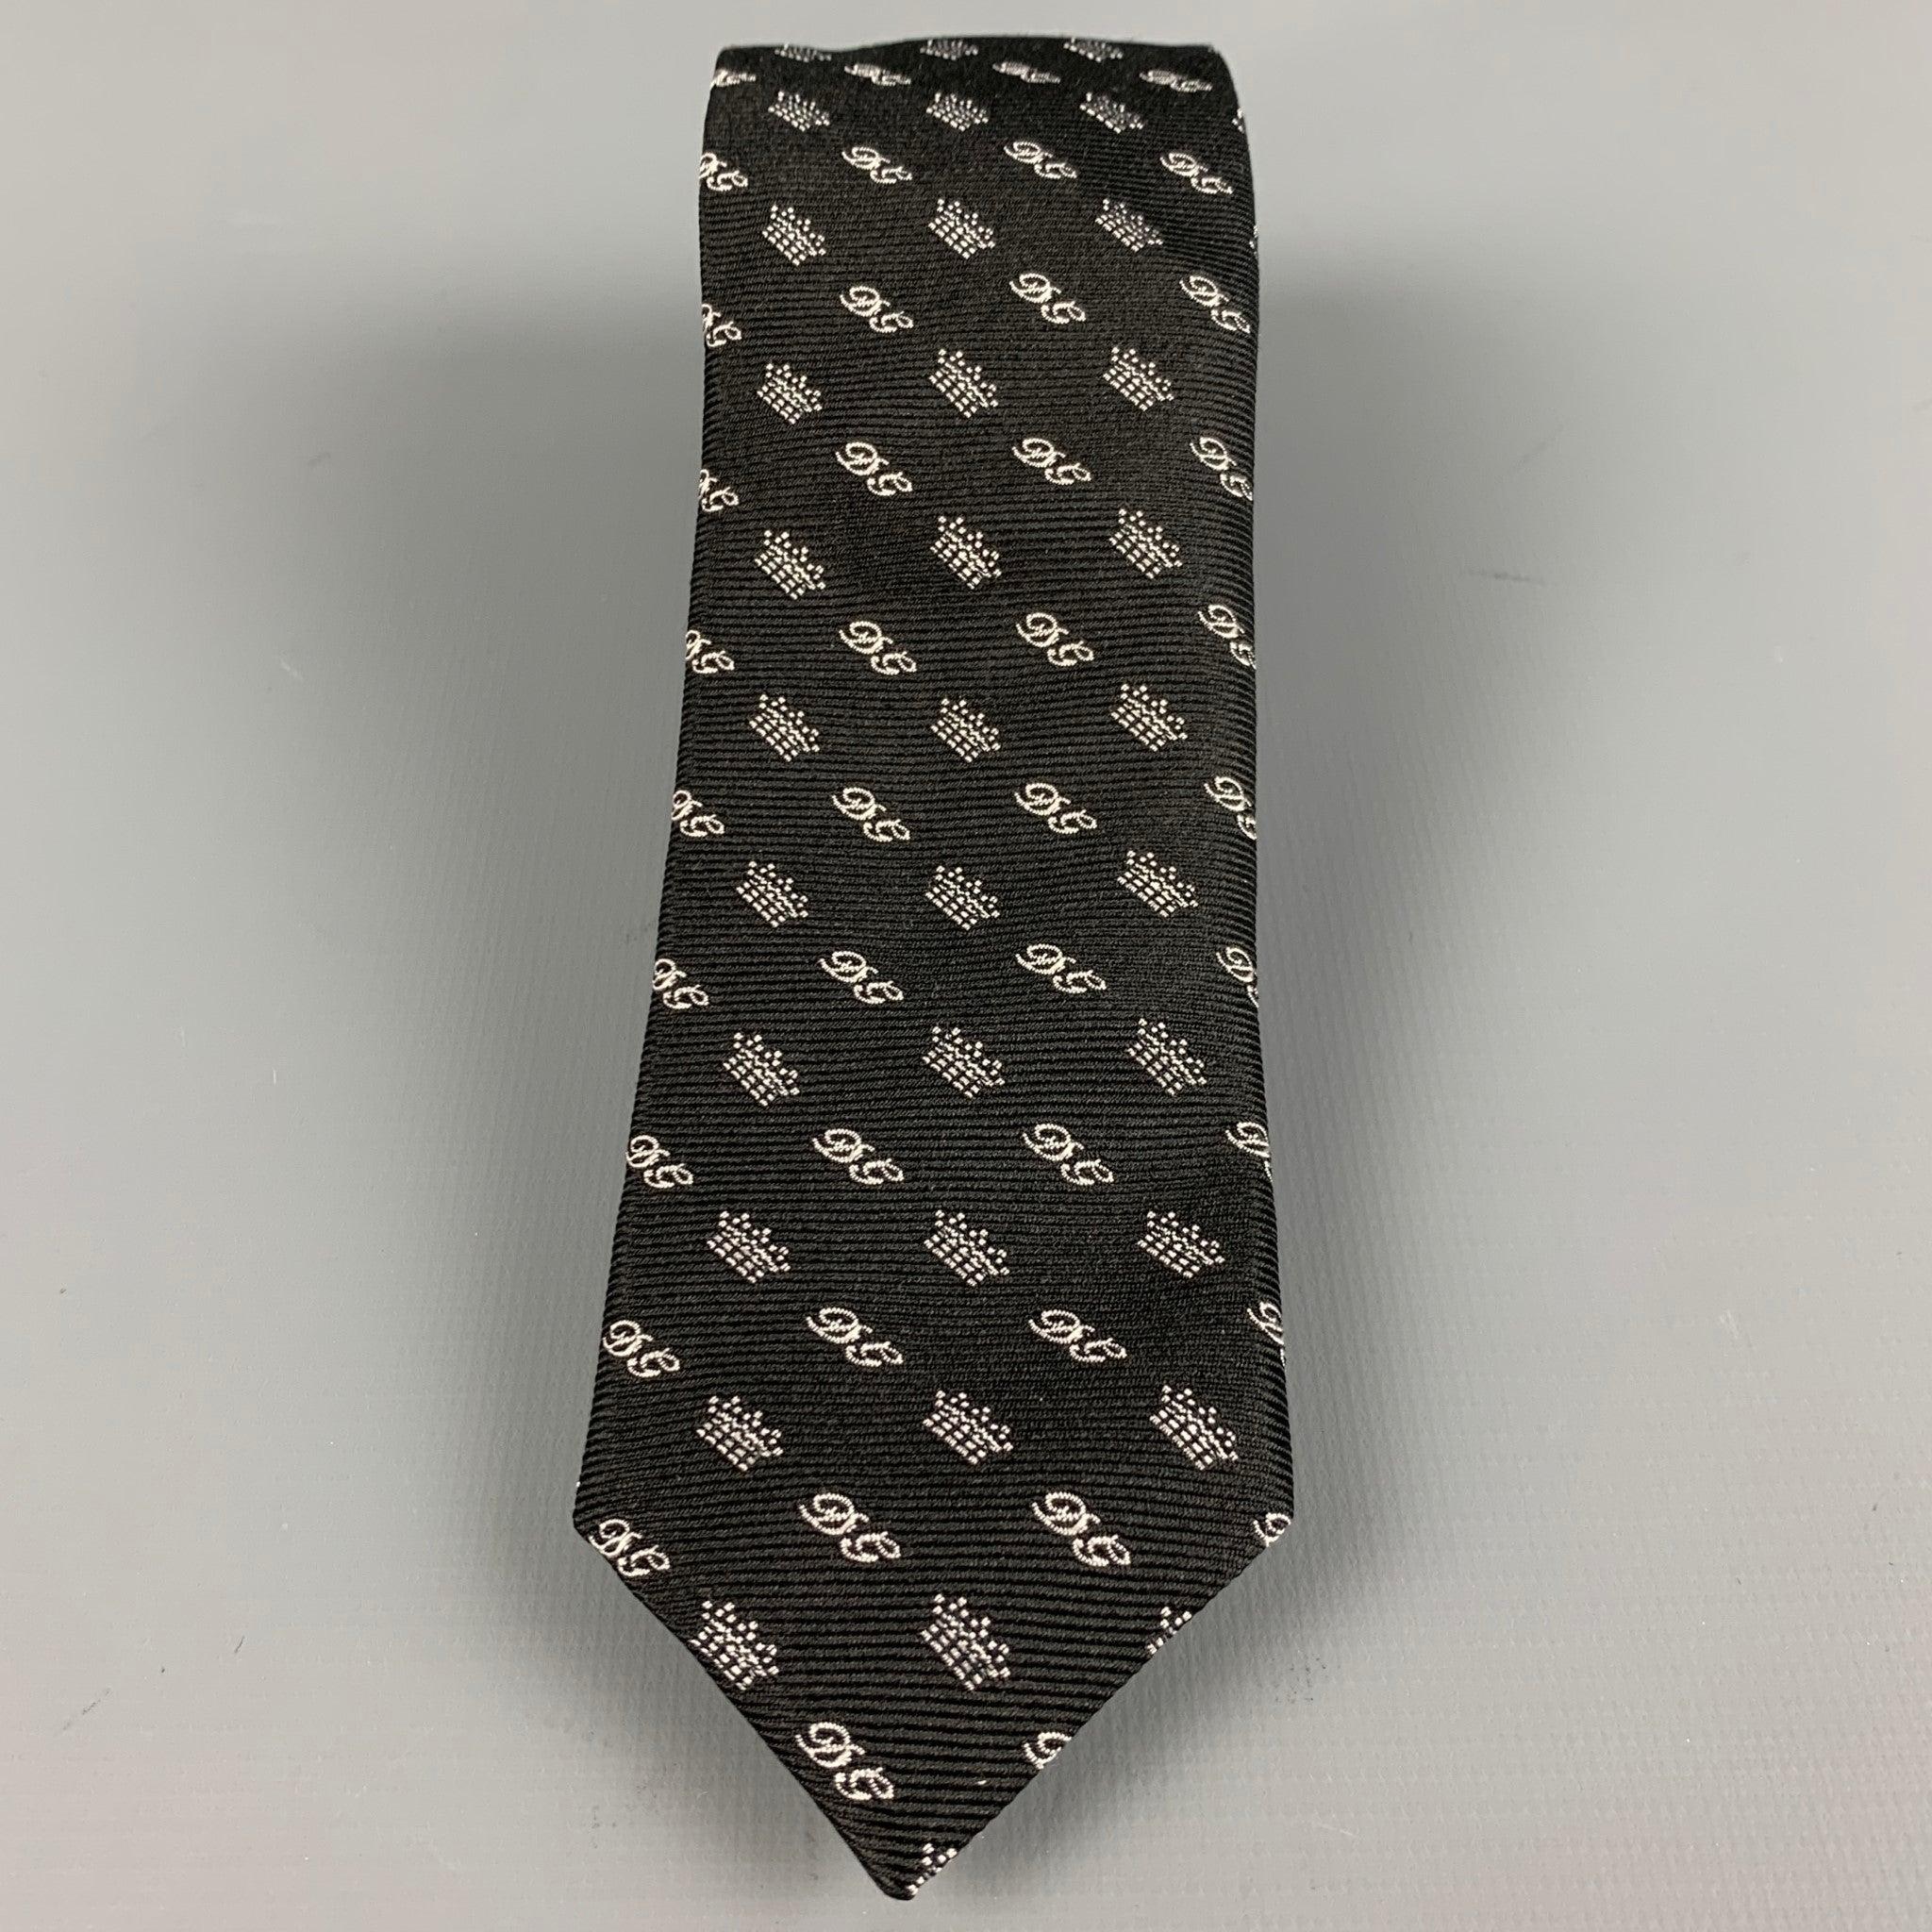 DOLCE & GABBANA
necktie in a black silk twill featuring white DG monogram pattern, and skinny fit. Made in Italy.Excellent Pre-Owned Condition. 

Measurements: 
  Width: 2 inches Length: 57 inches 
  
  
 
Reference: 127110
Category: Tie
More